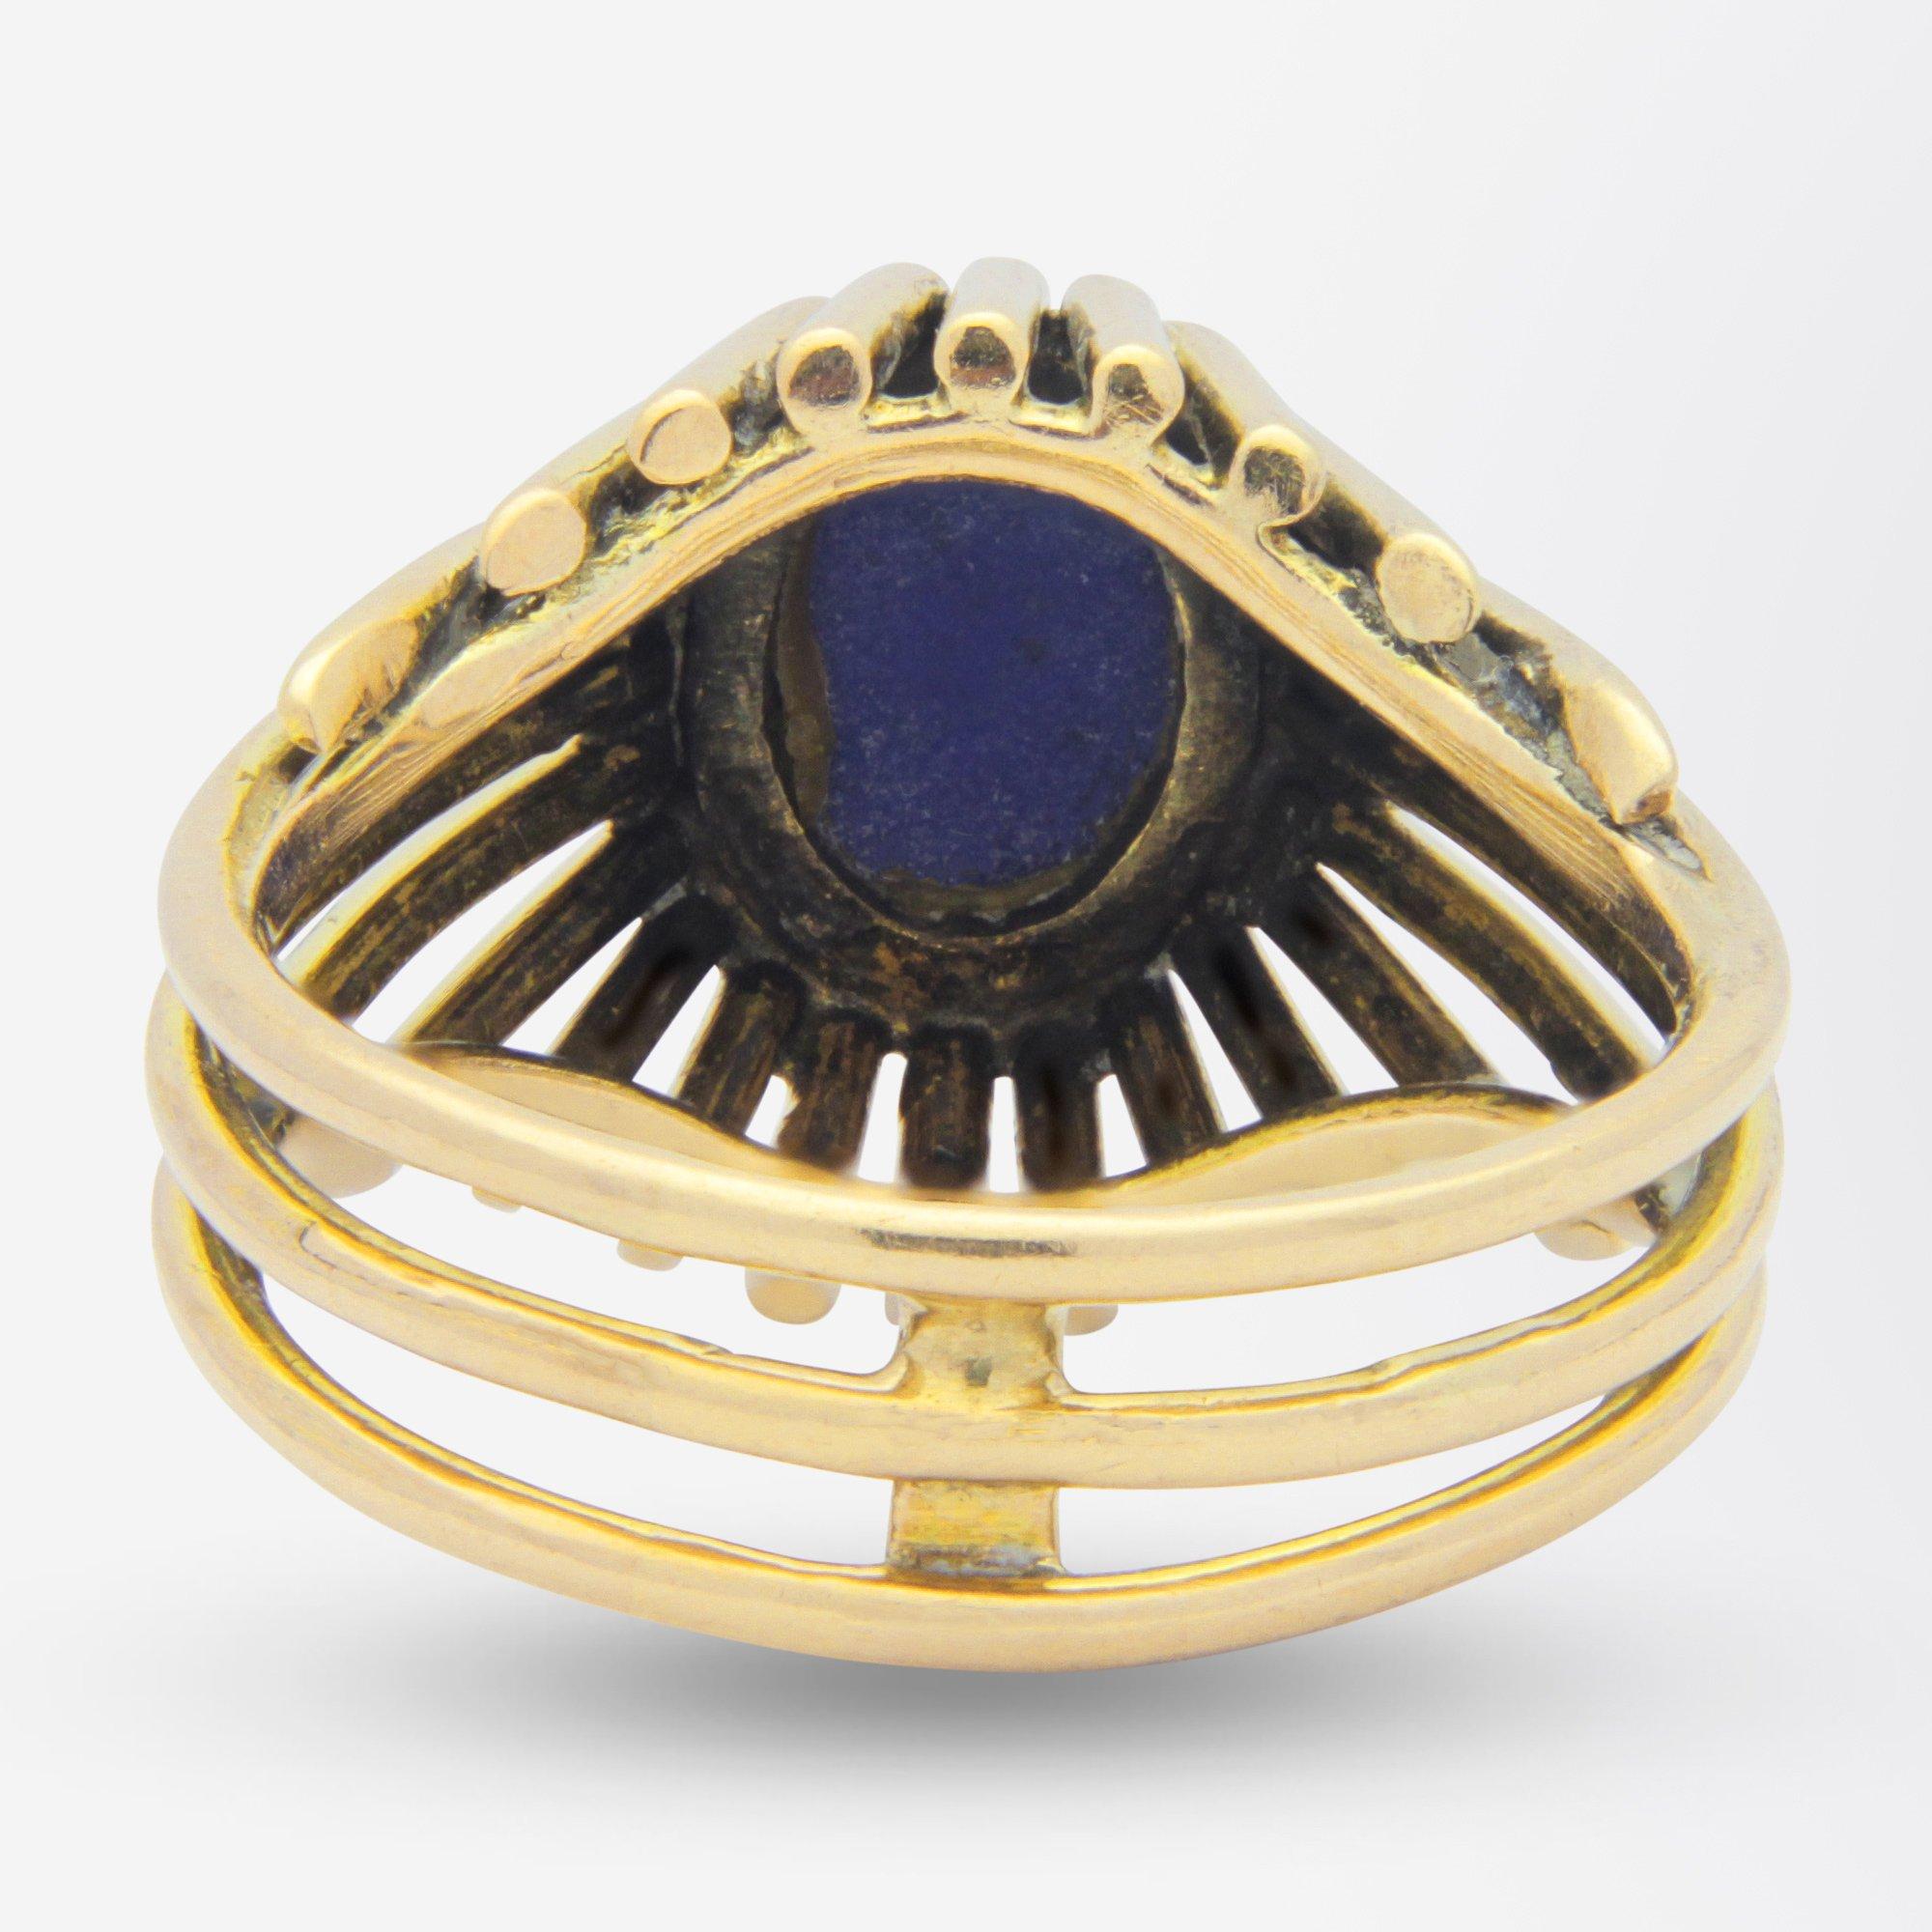 14 Karat Yellow Gold Ring with Cabochon Lapis Lazuli In Good Condition For Sale In Brisbane City, QLD